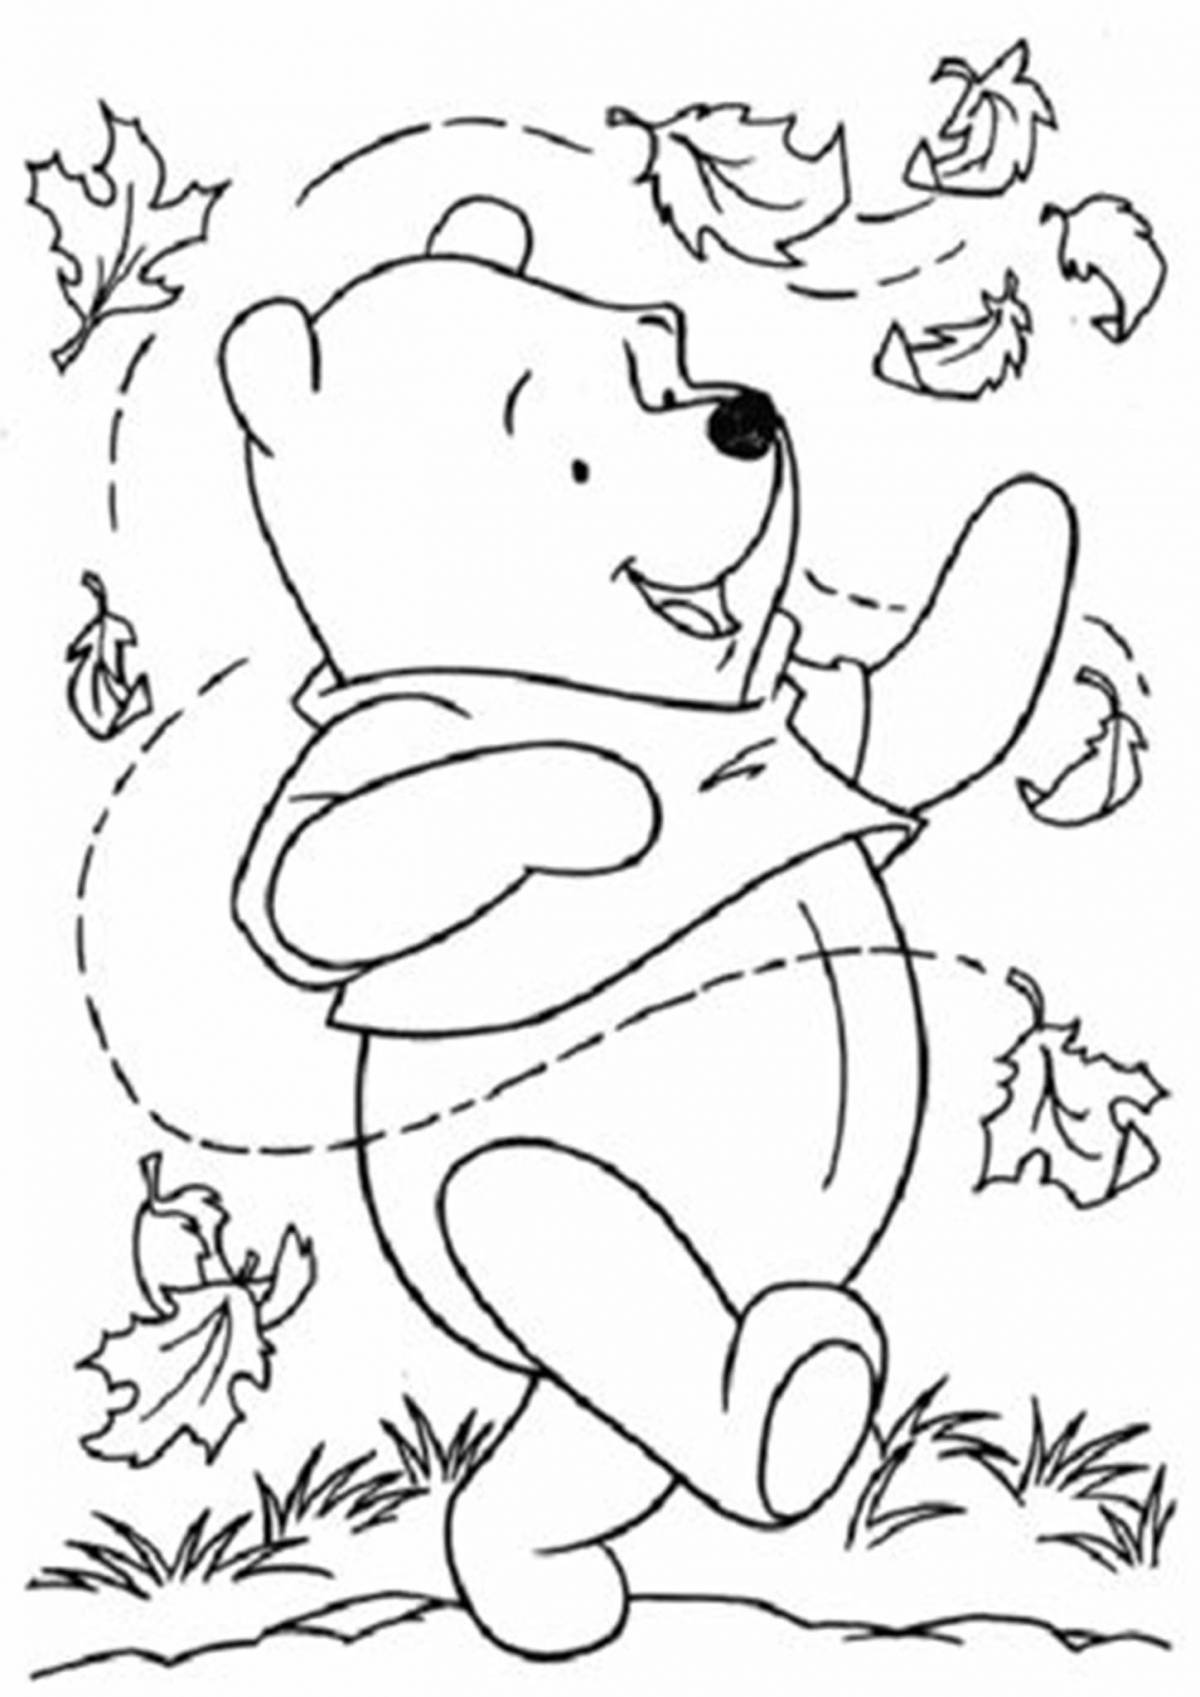 Adorable winnie the pooh coloring book